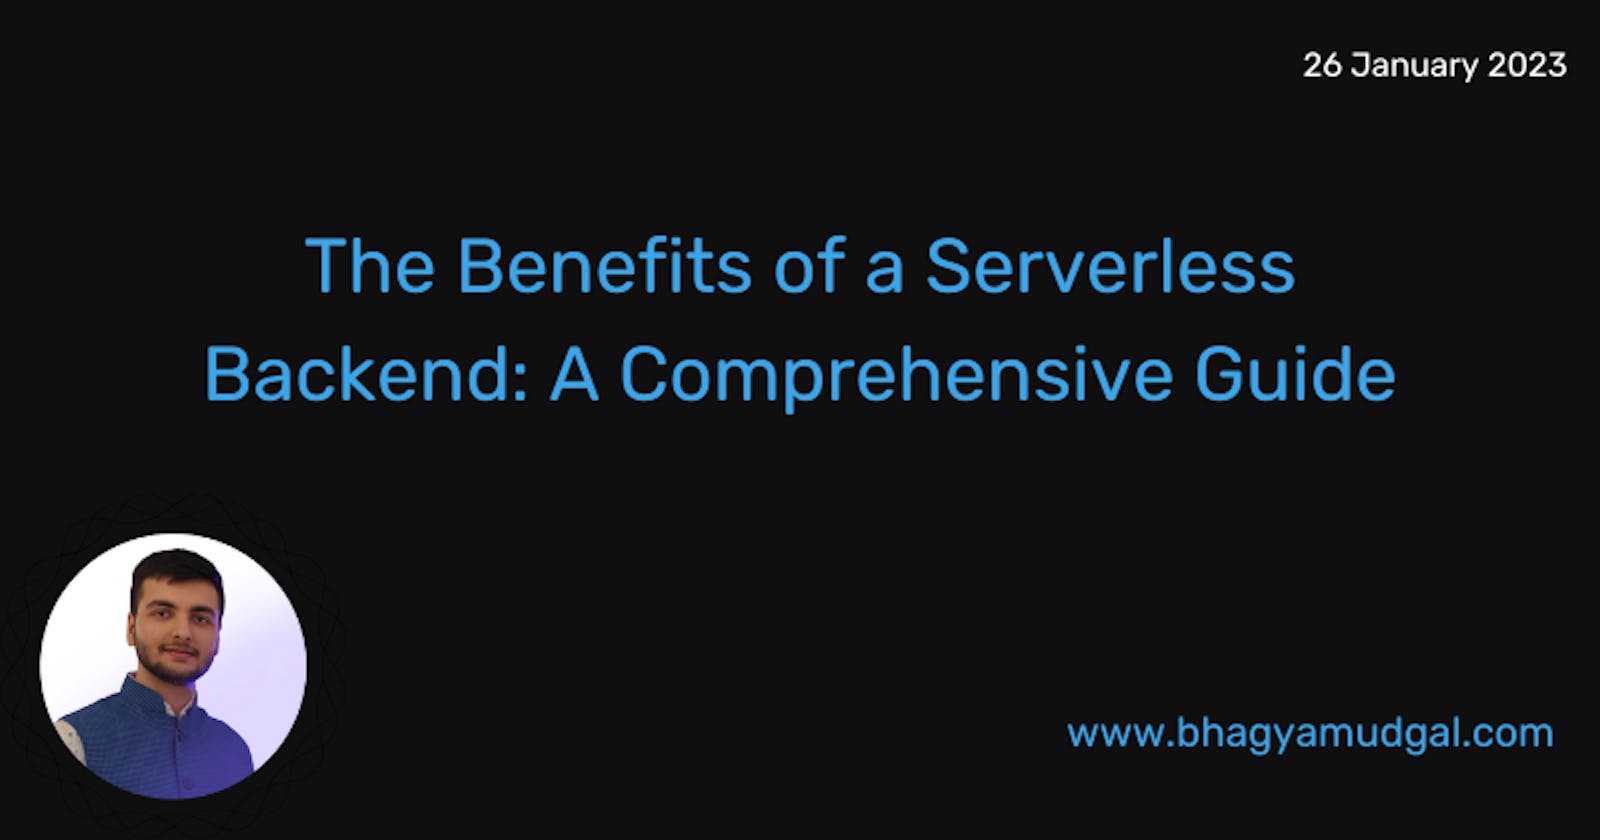 The Benefits of a Serverless Backend: A Comprehensive Guide